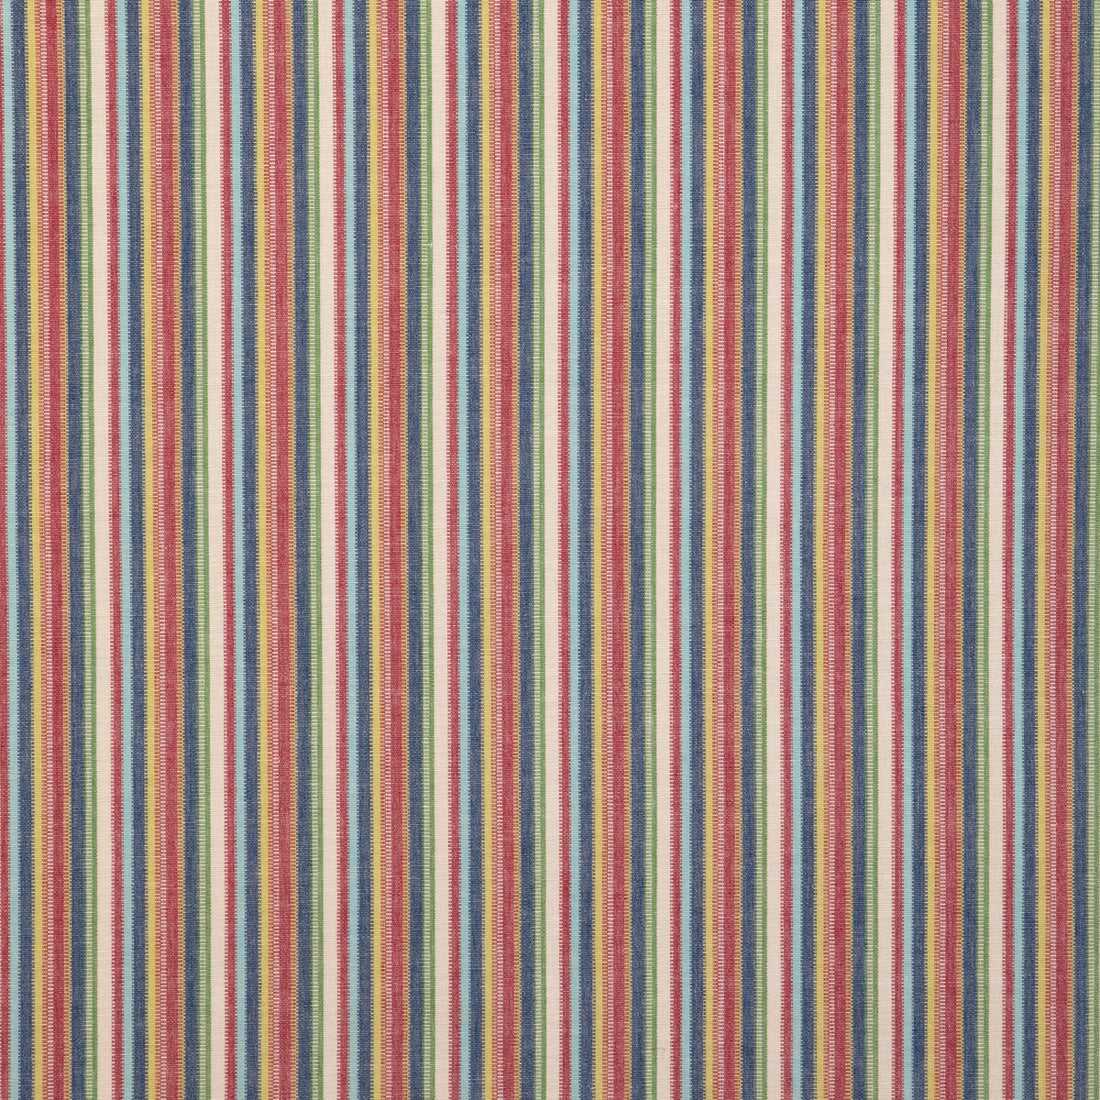 Sandbanks Stripe fabric in navy/red color - pattern 2023105.519.0 - by Lee Jofa in the Highfield Stripes And Plaids collection